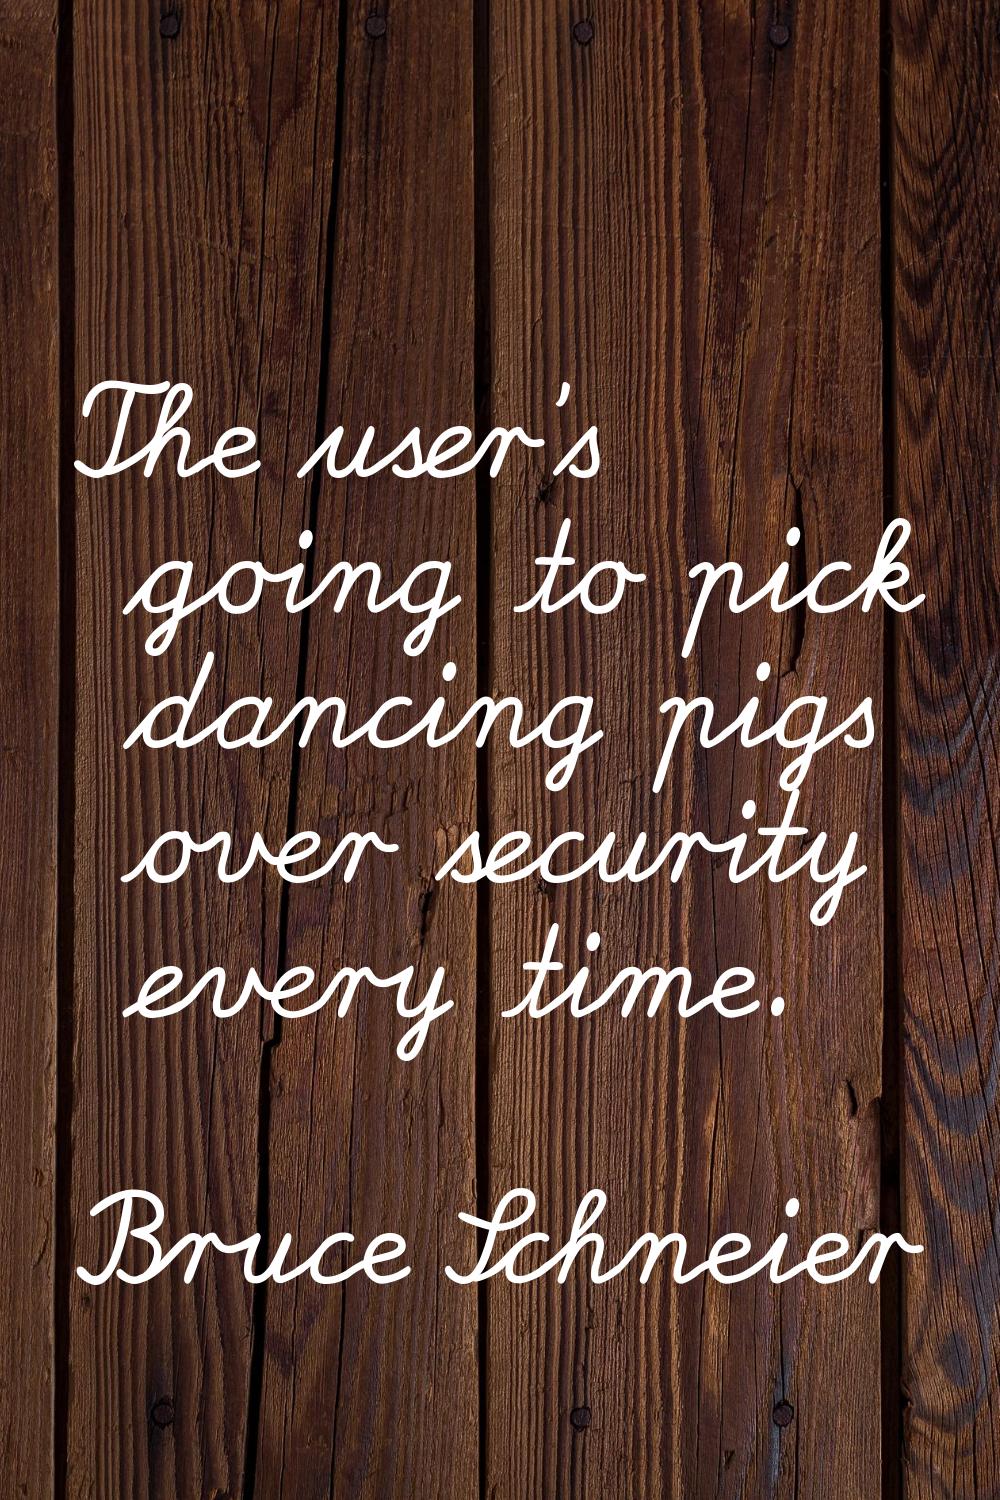 The user's going to pick dancing pigs over security every time.